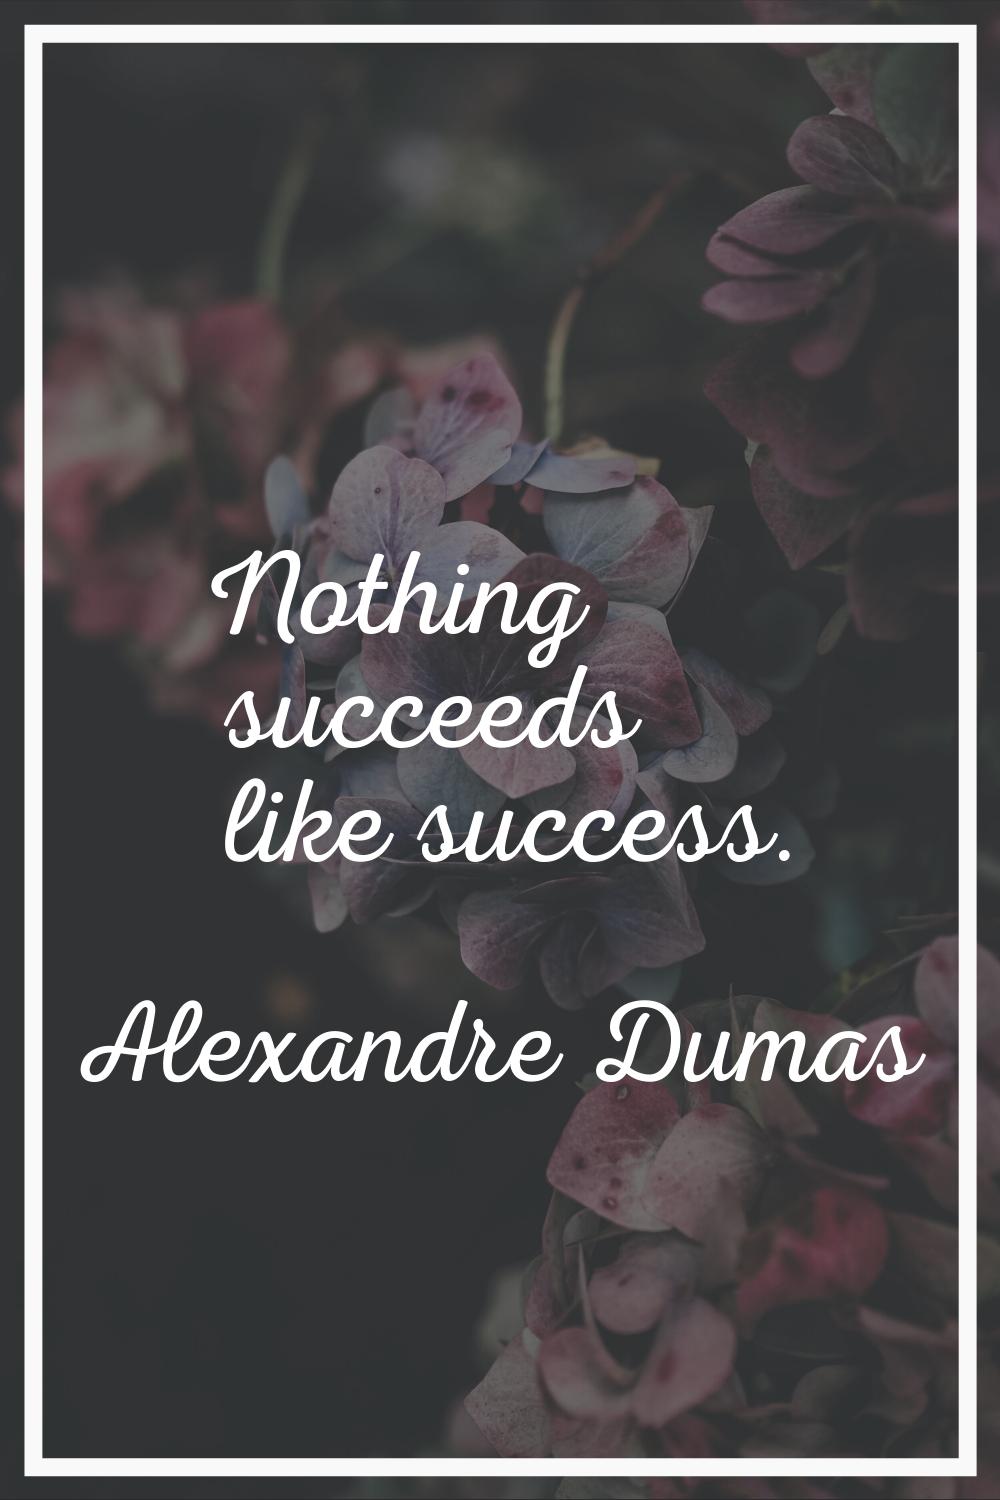 Nothing succeeds like success.